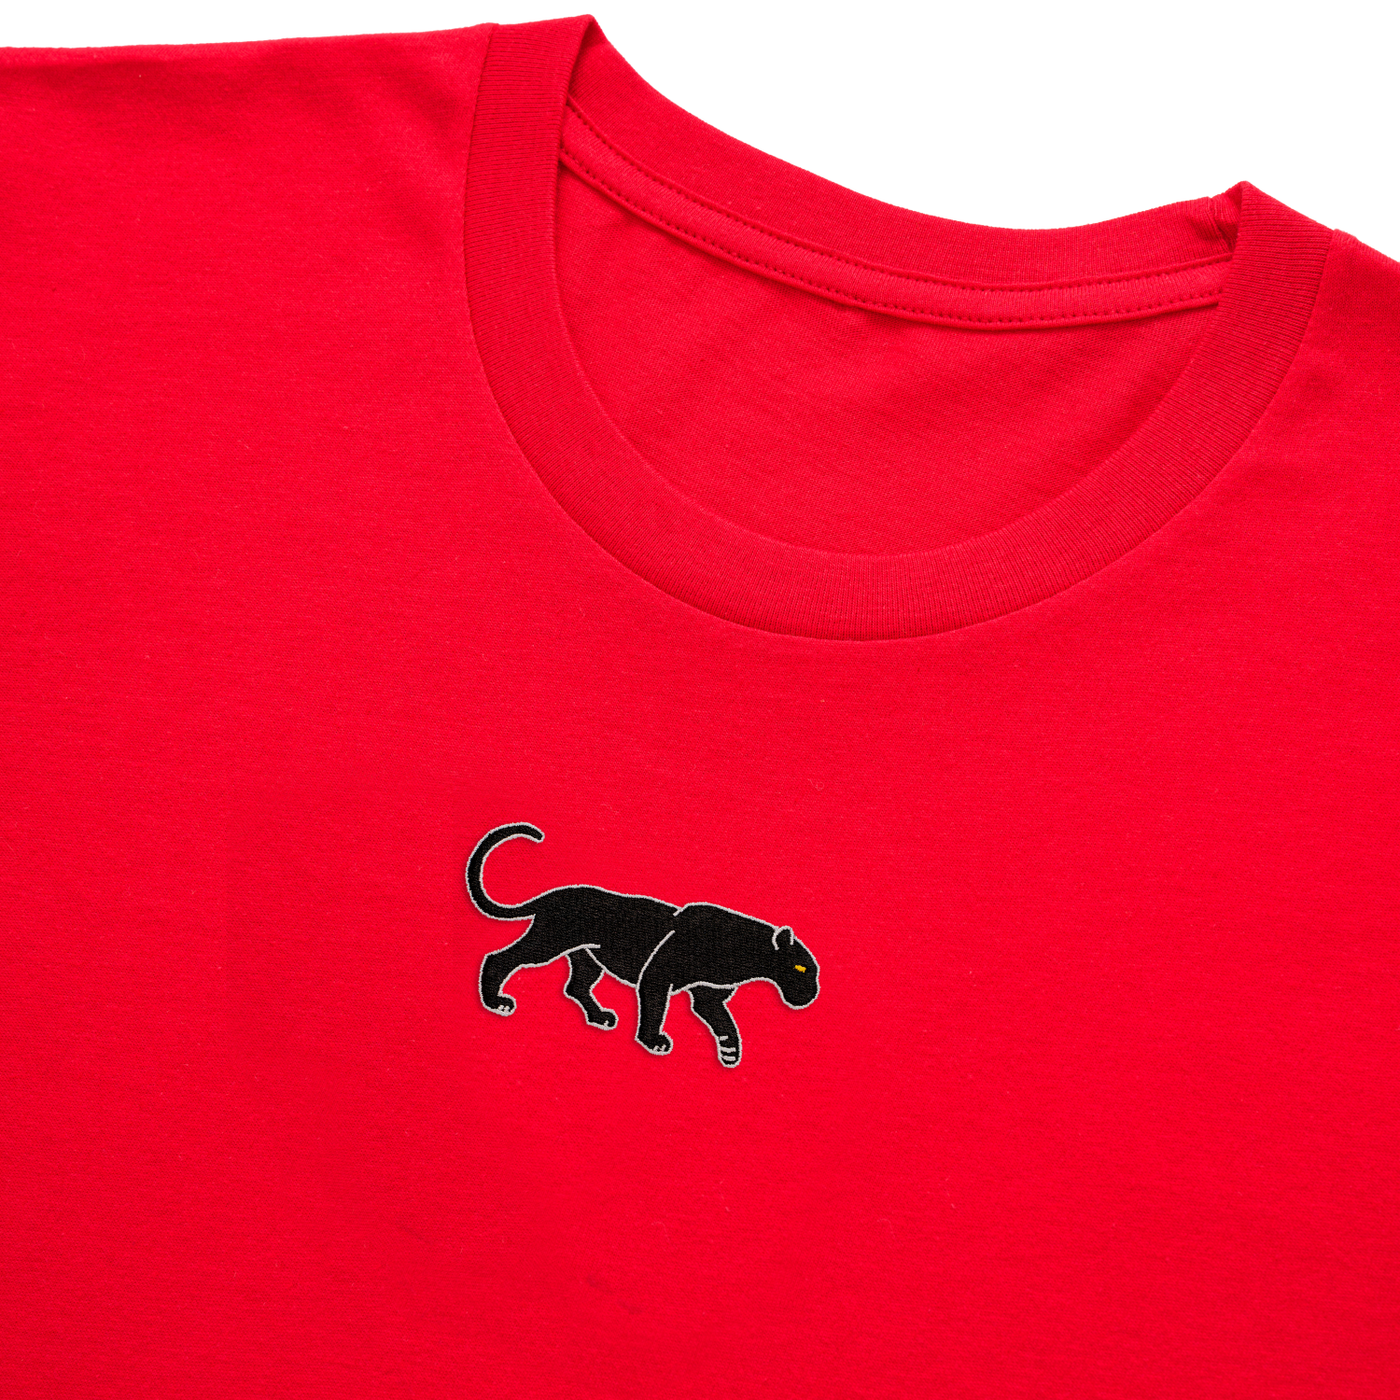 Bobby's Planet Women's Embroidered Black Jaguar T-Shirt from South American Amazon Animals Collection in Red Color#color_red